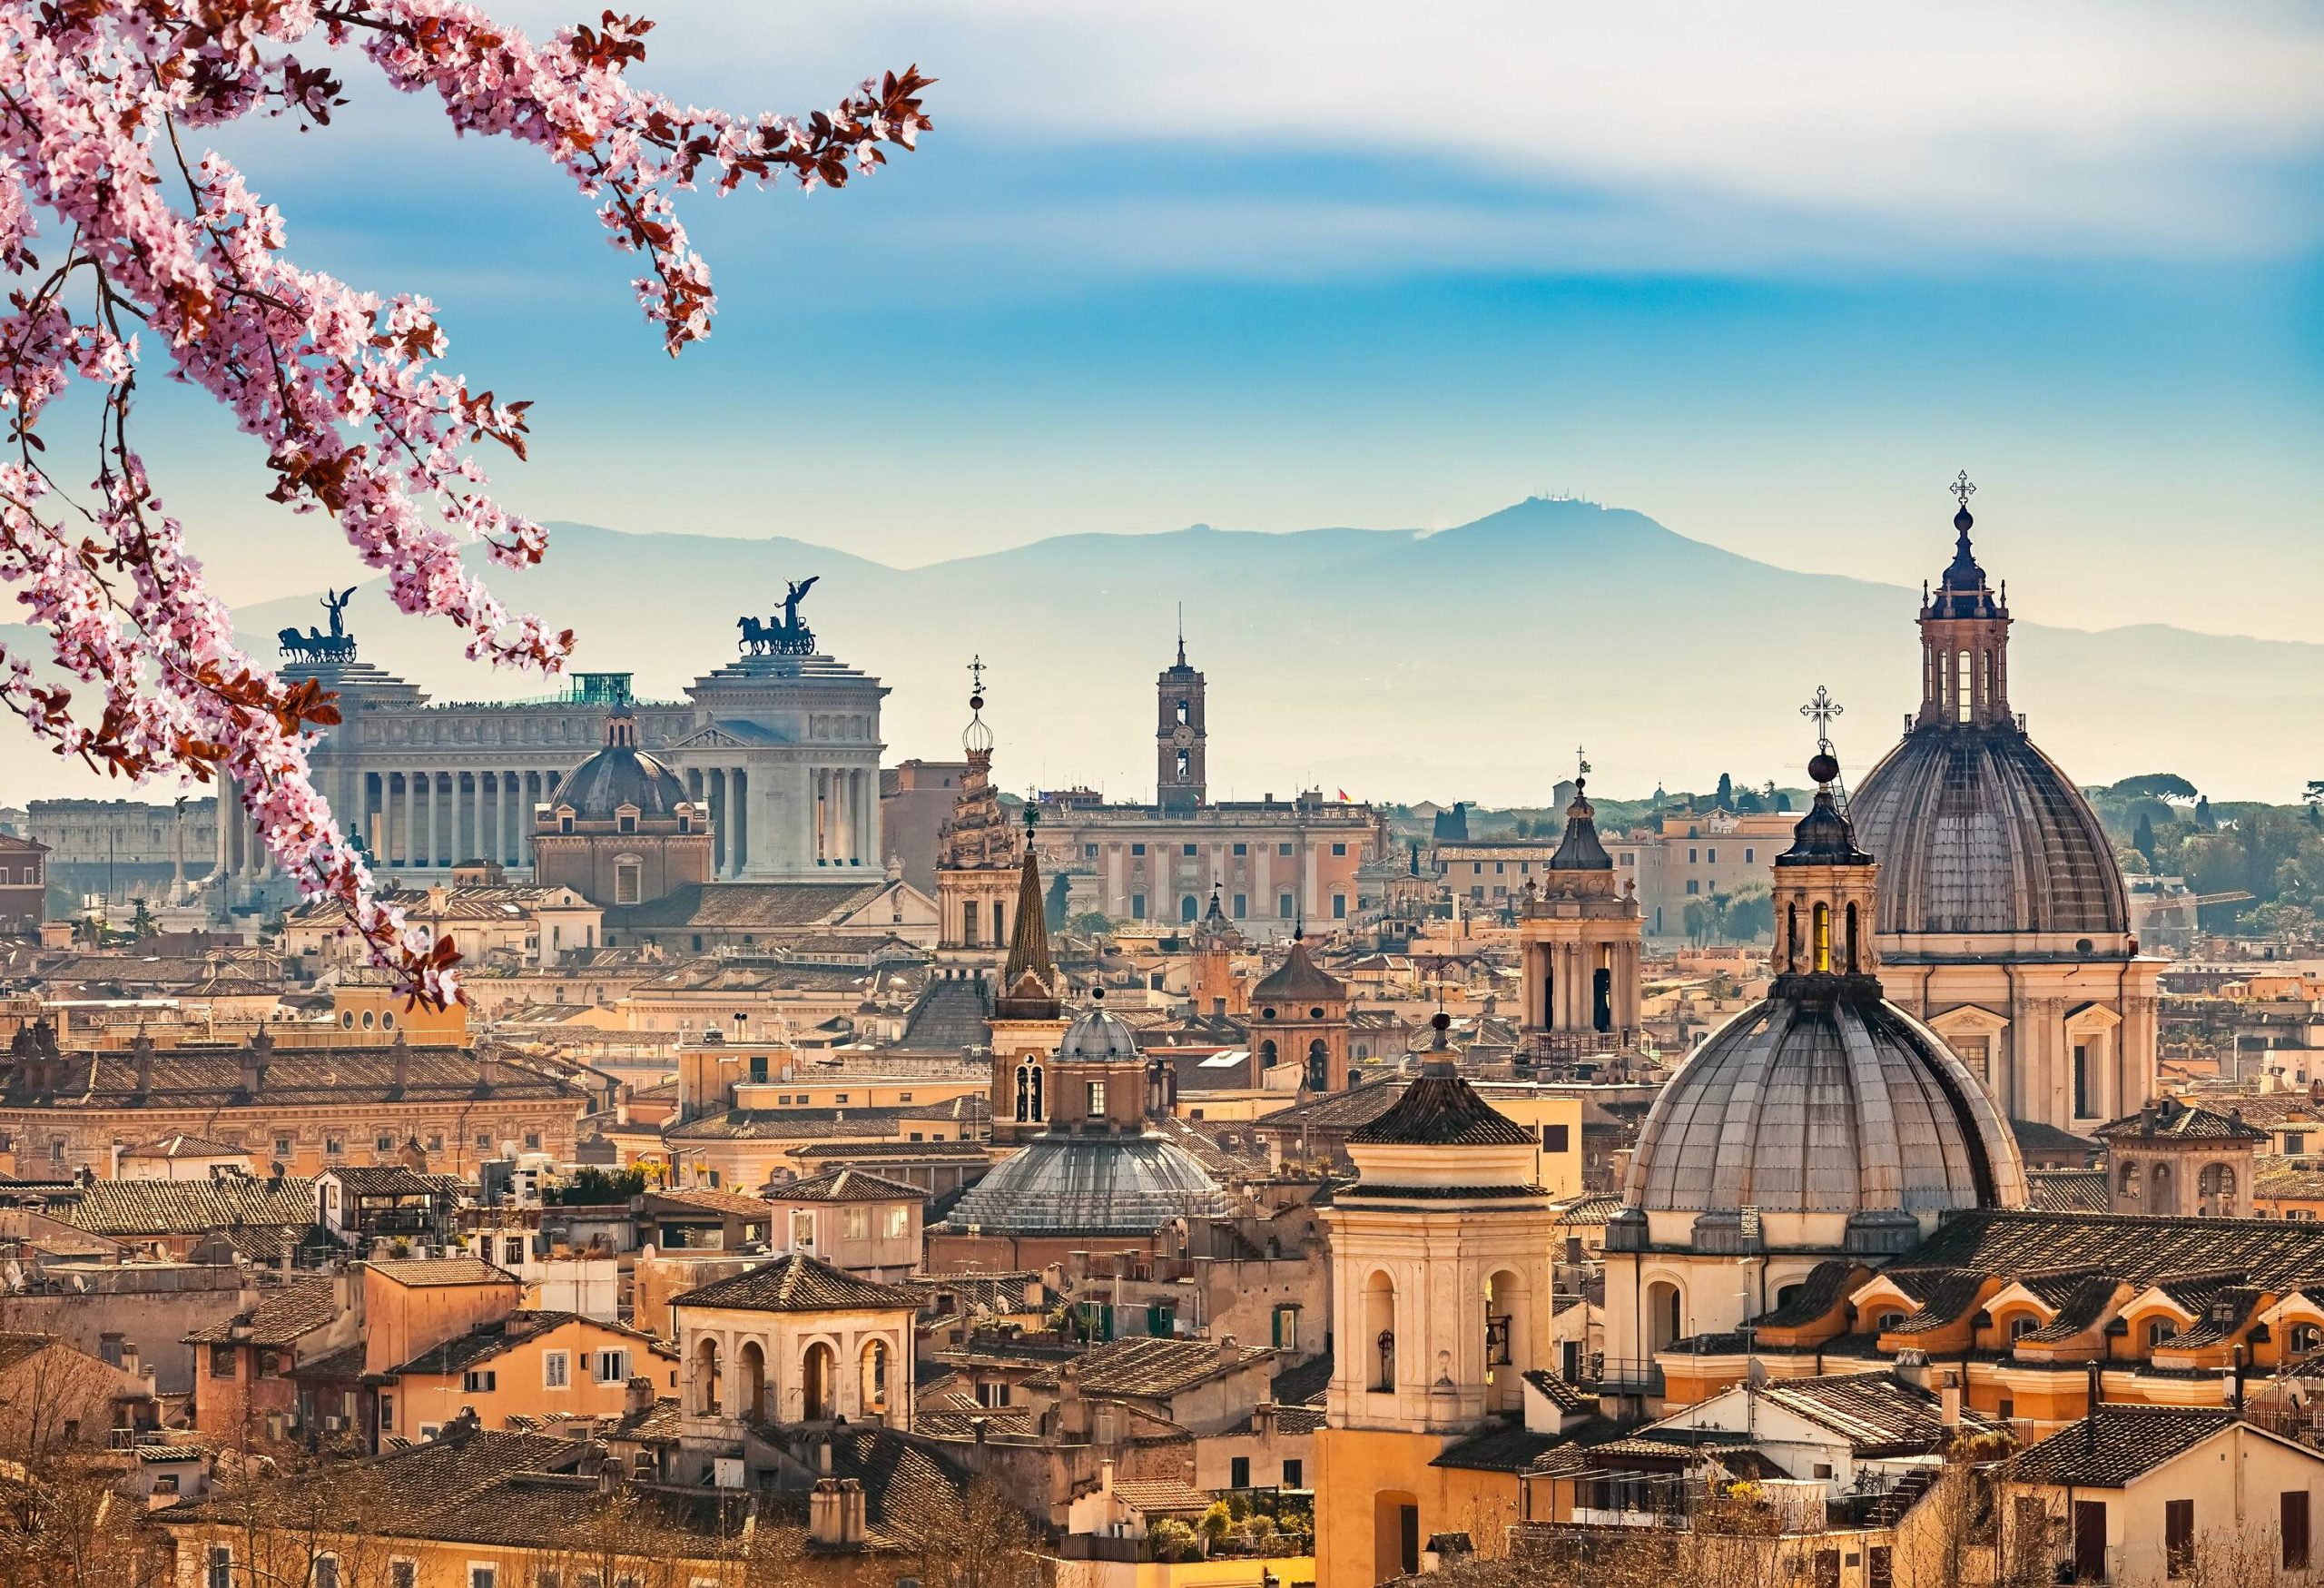 The striking skyline of Rome accentuated by domed towers and historical landmarks.